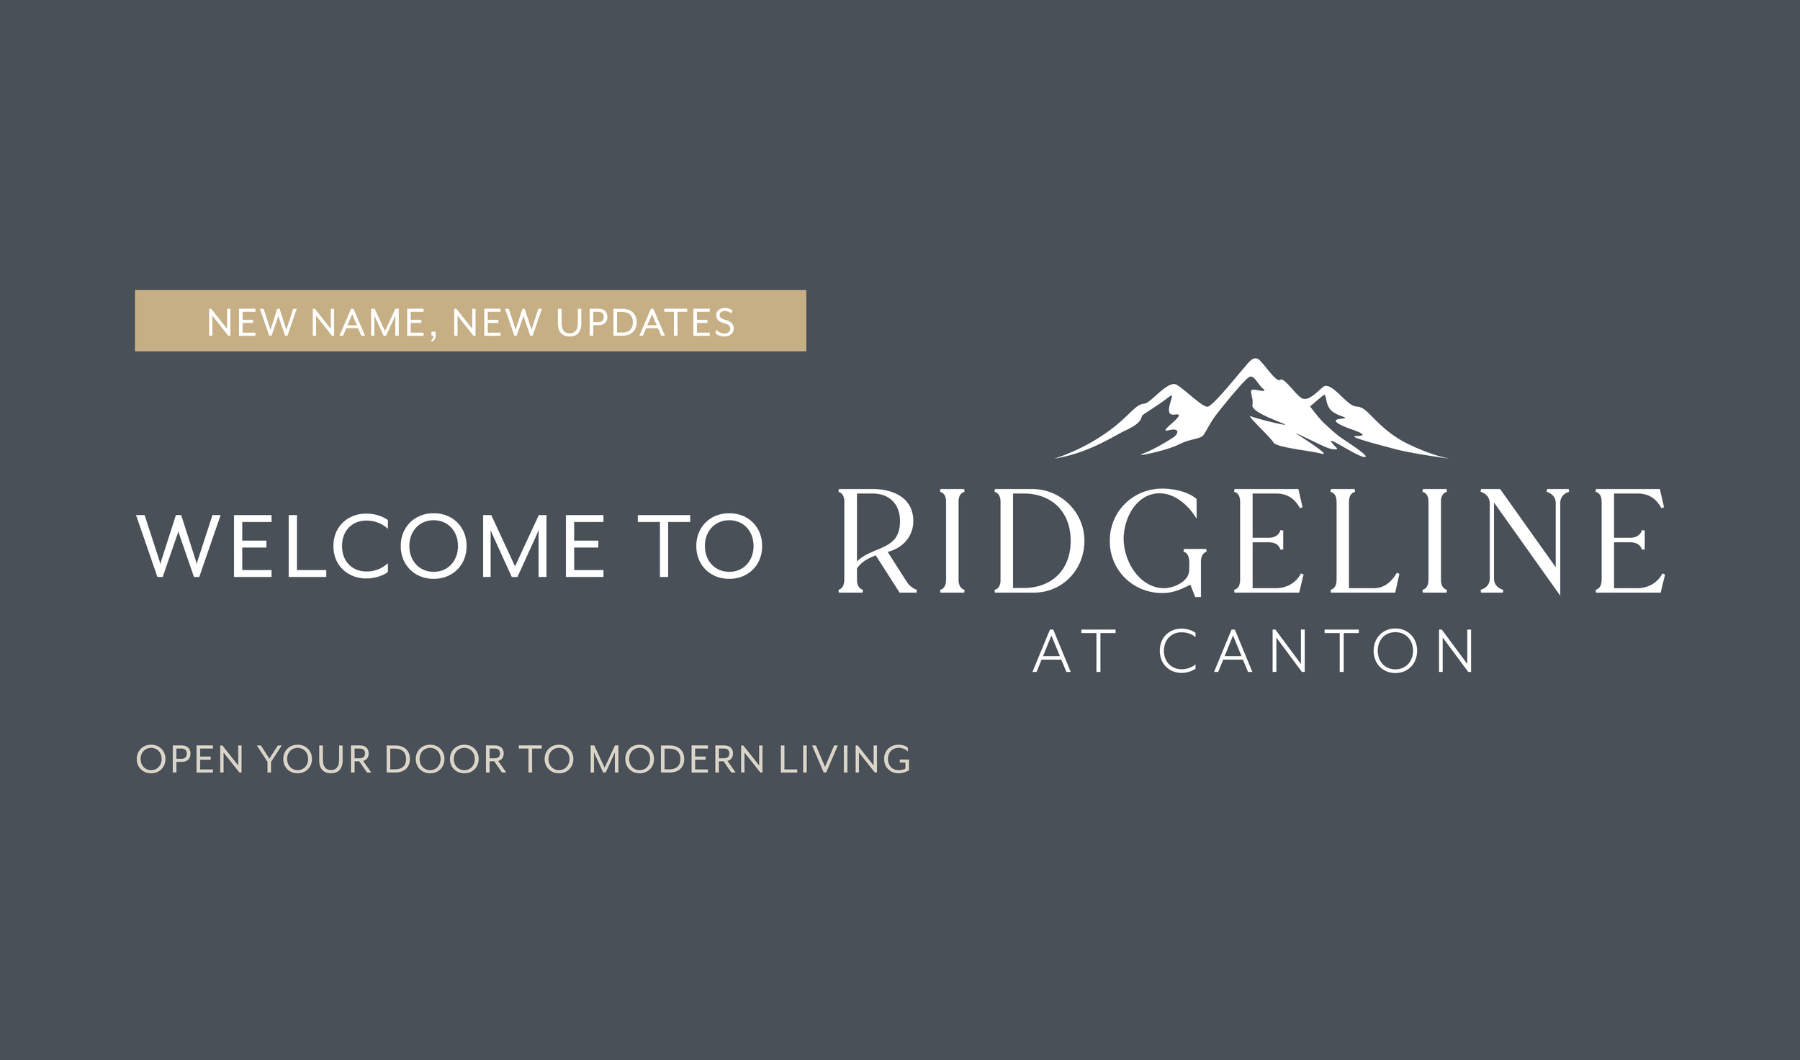 Welcome to Ridgeline at Canton